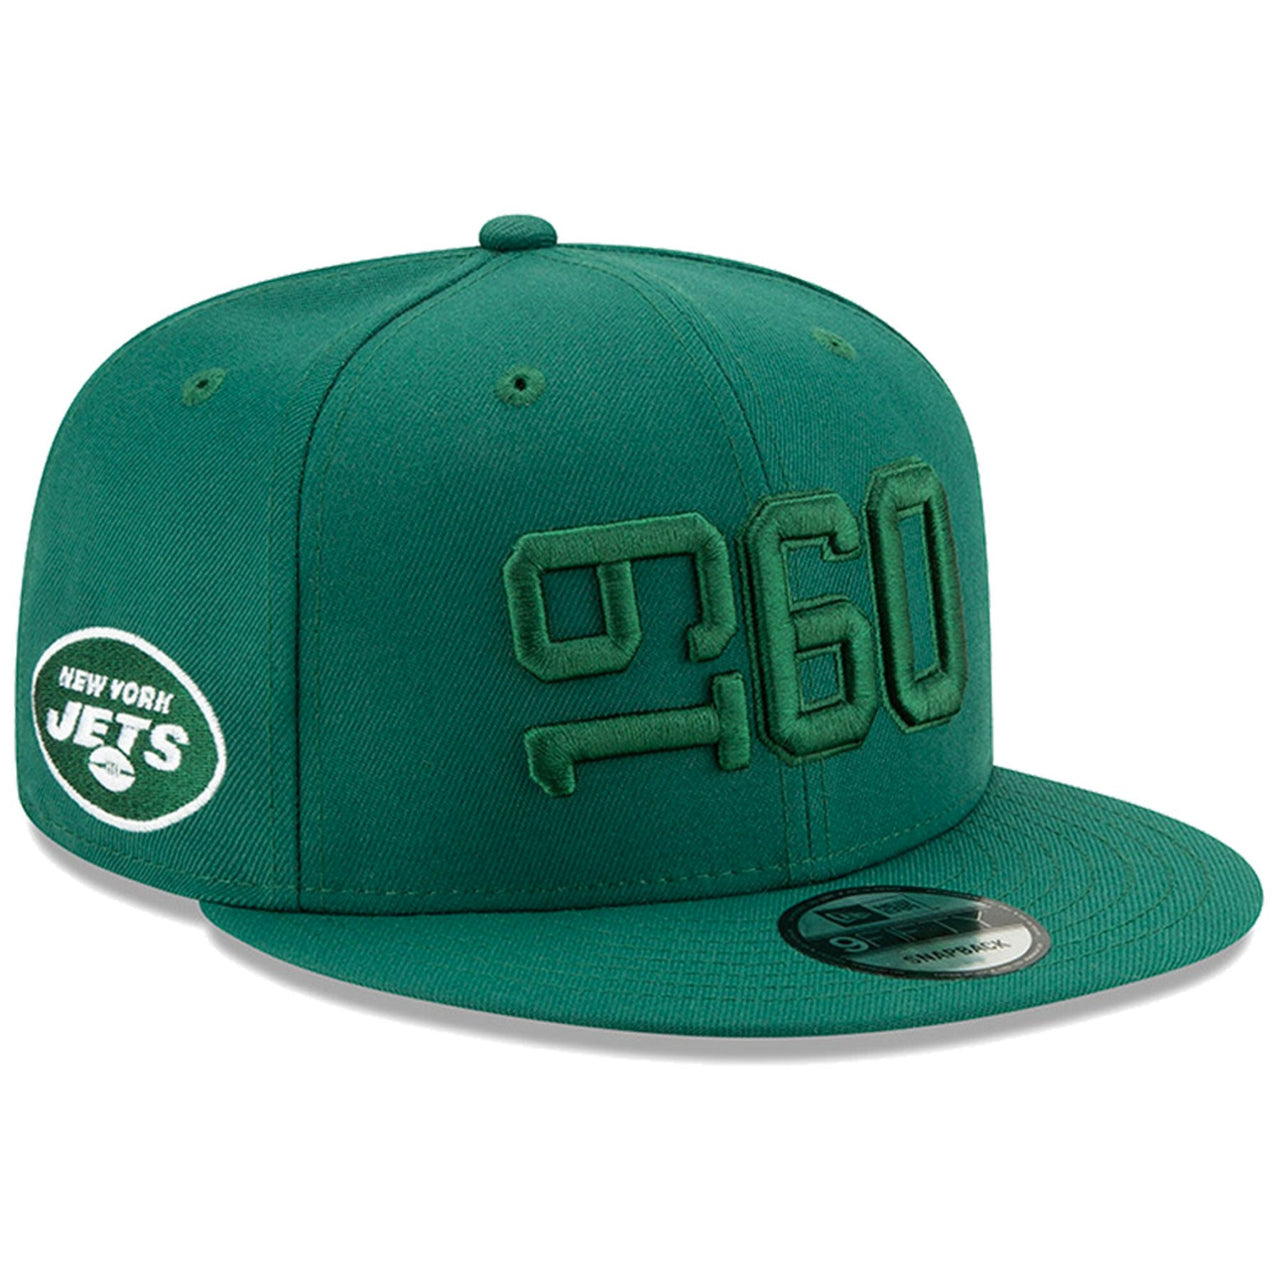 New York Jets New Era 2019 NFL On Field Sideline Color Rush 9FIFTY Adjustable Green Snapback Hat